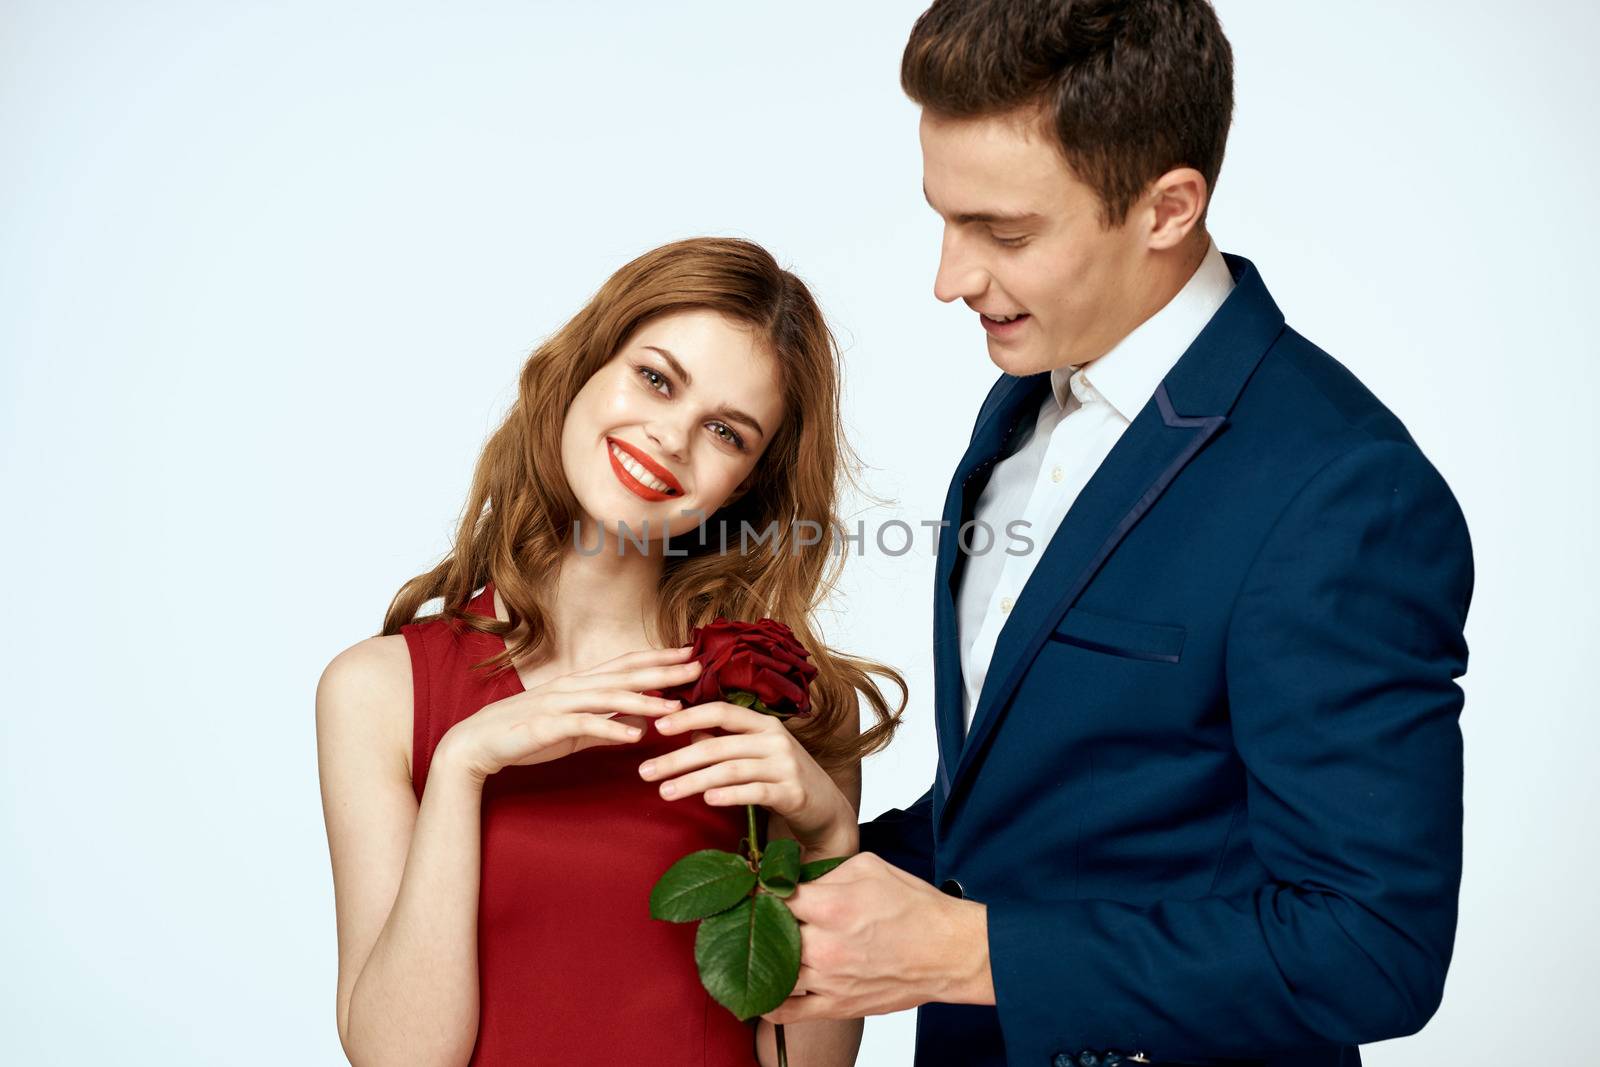 cute man and woman dating relationship red rose lifestyle romance by SHOTPRIME